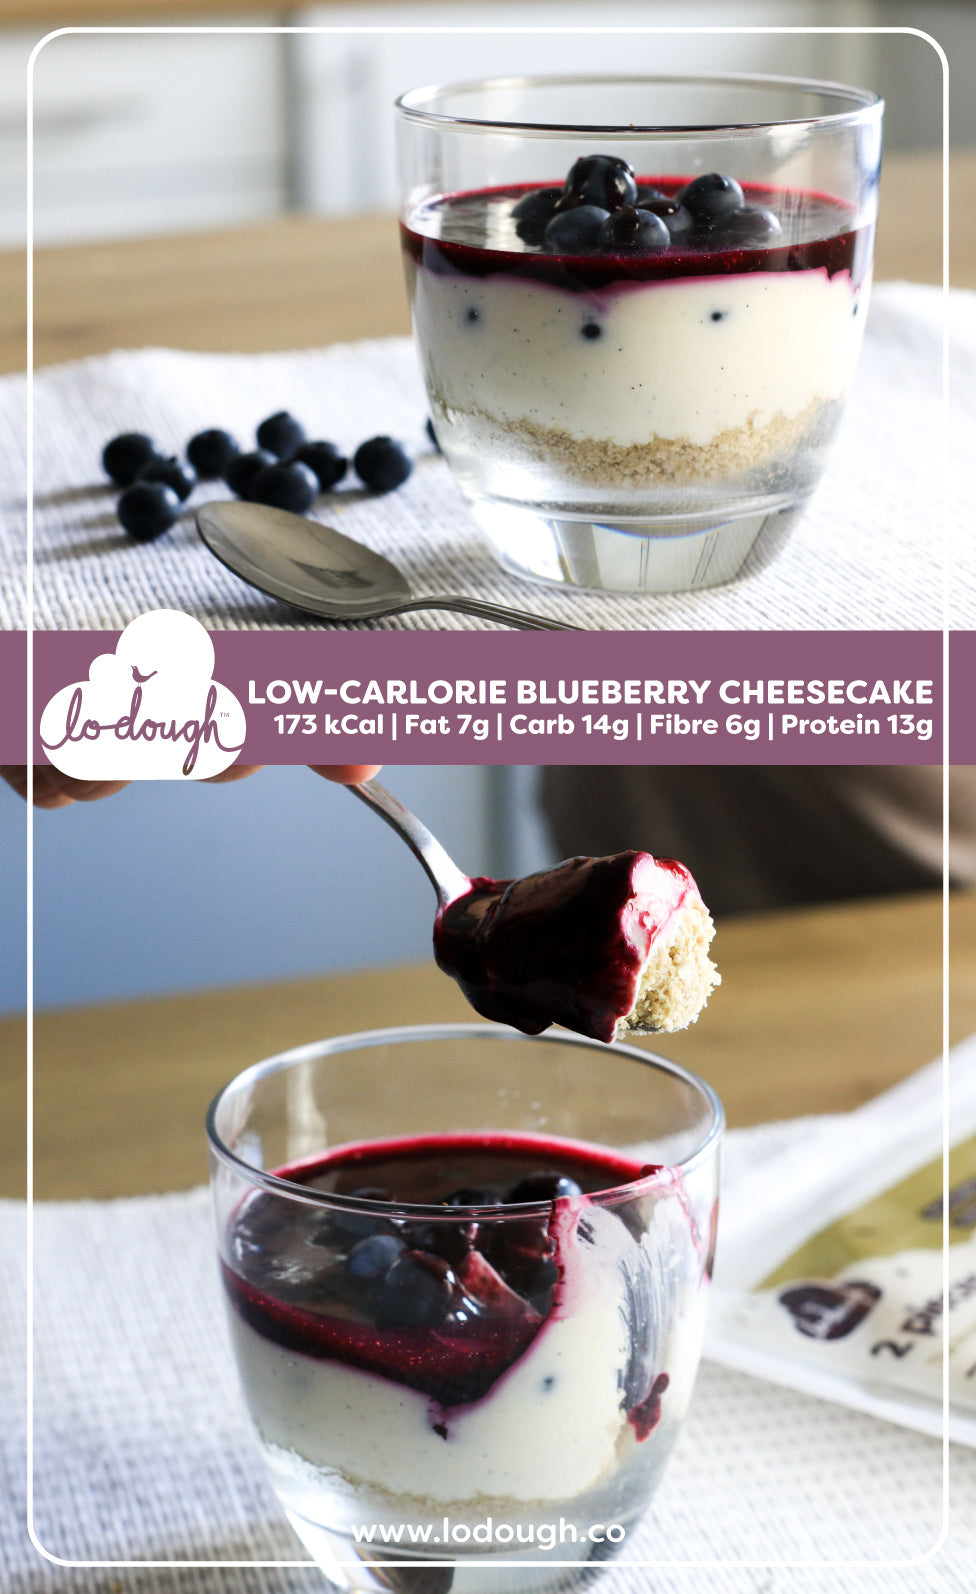 Low-calorie Cheesecake